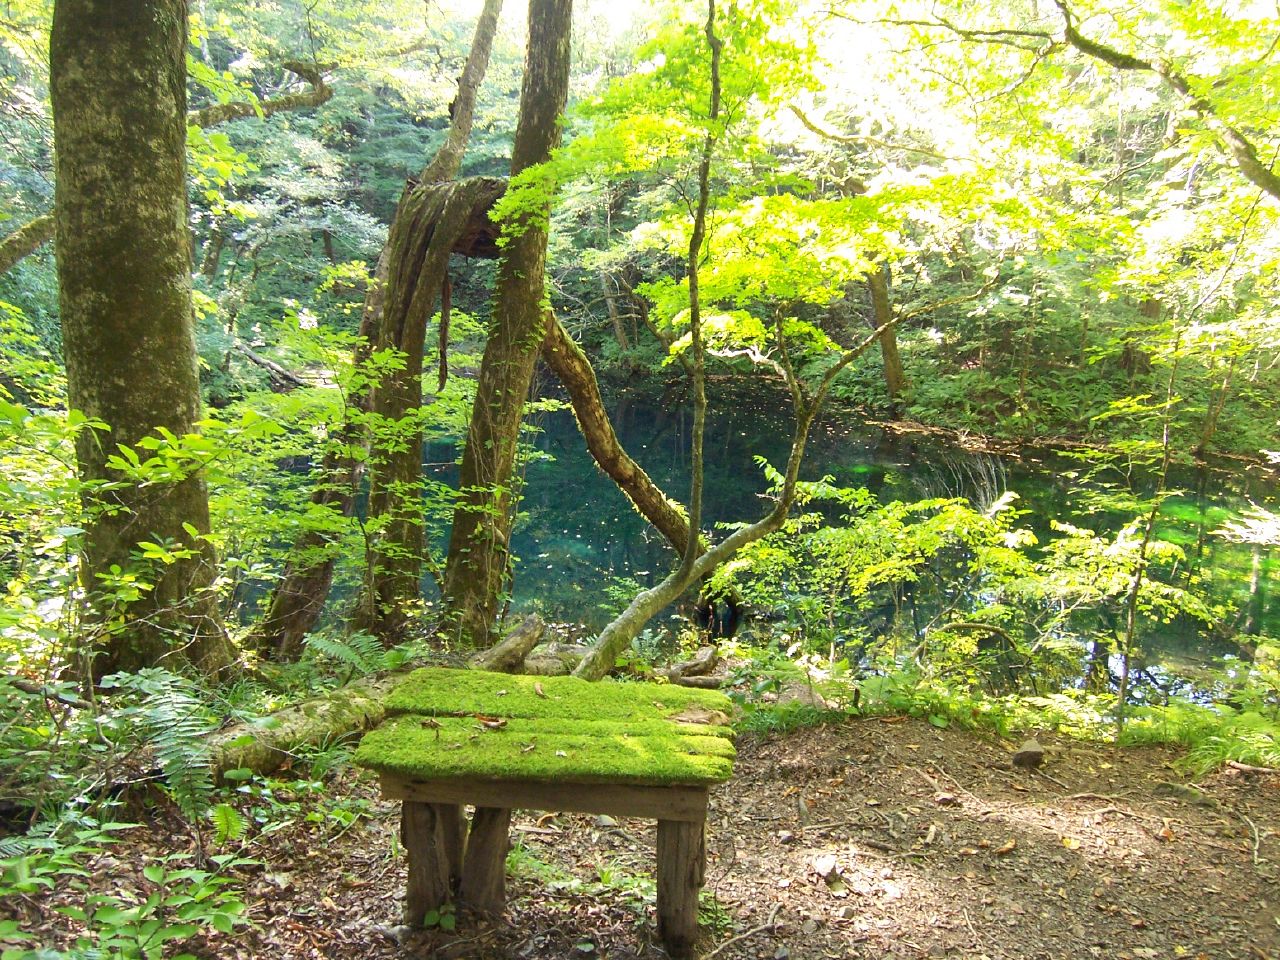 the mossy bench is in the forest by the river